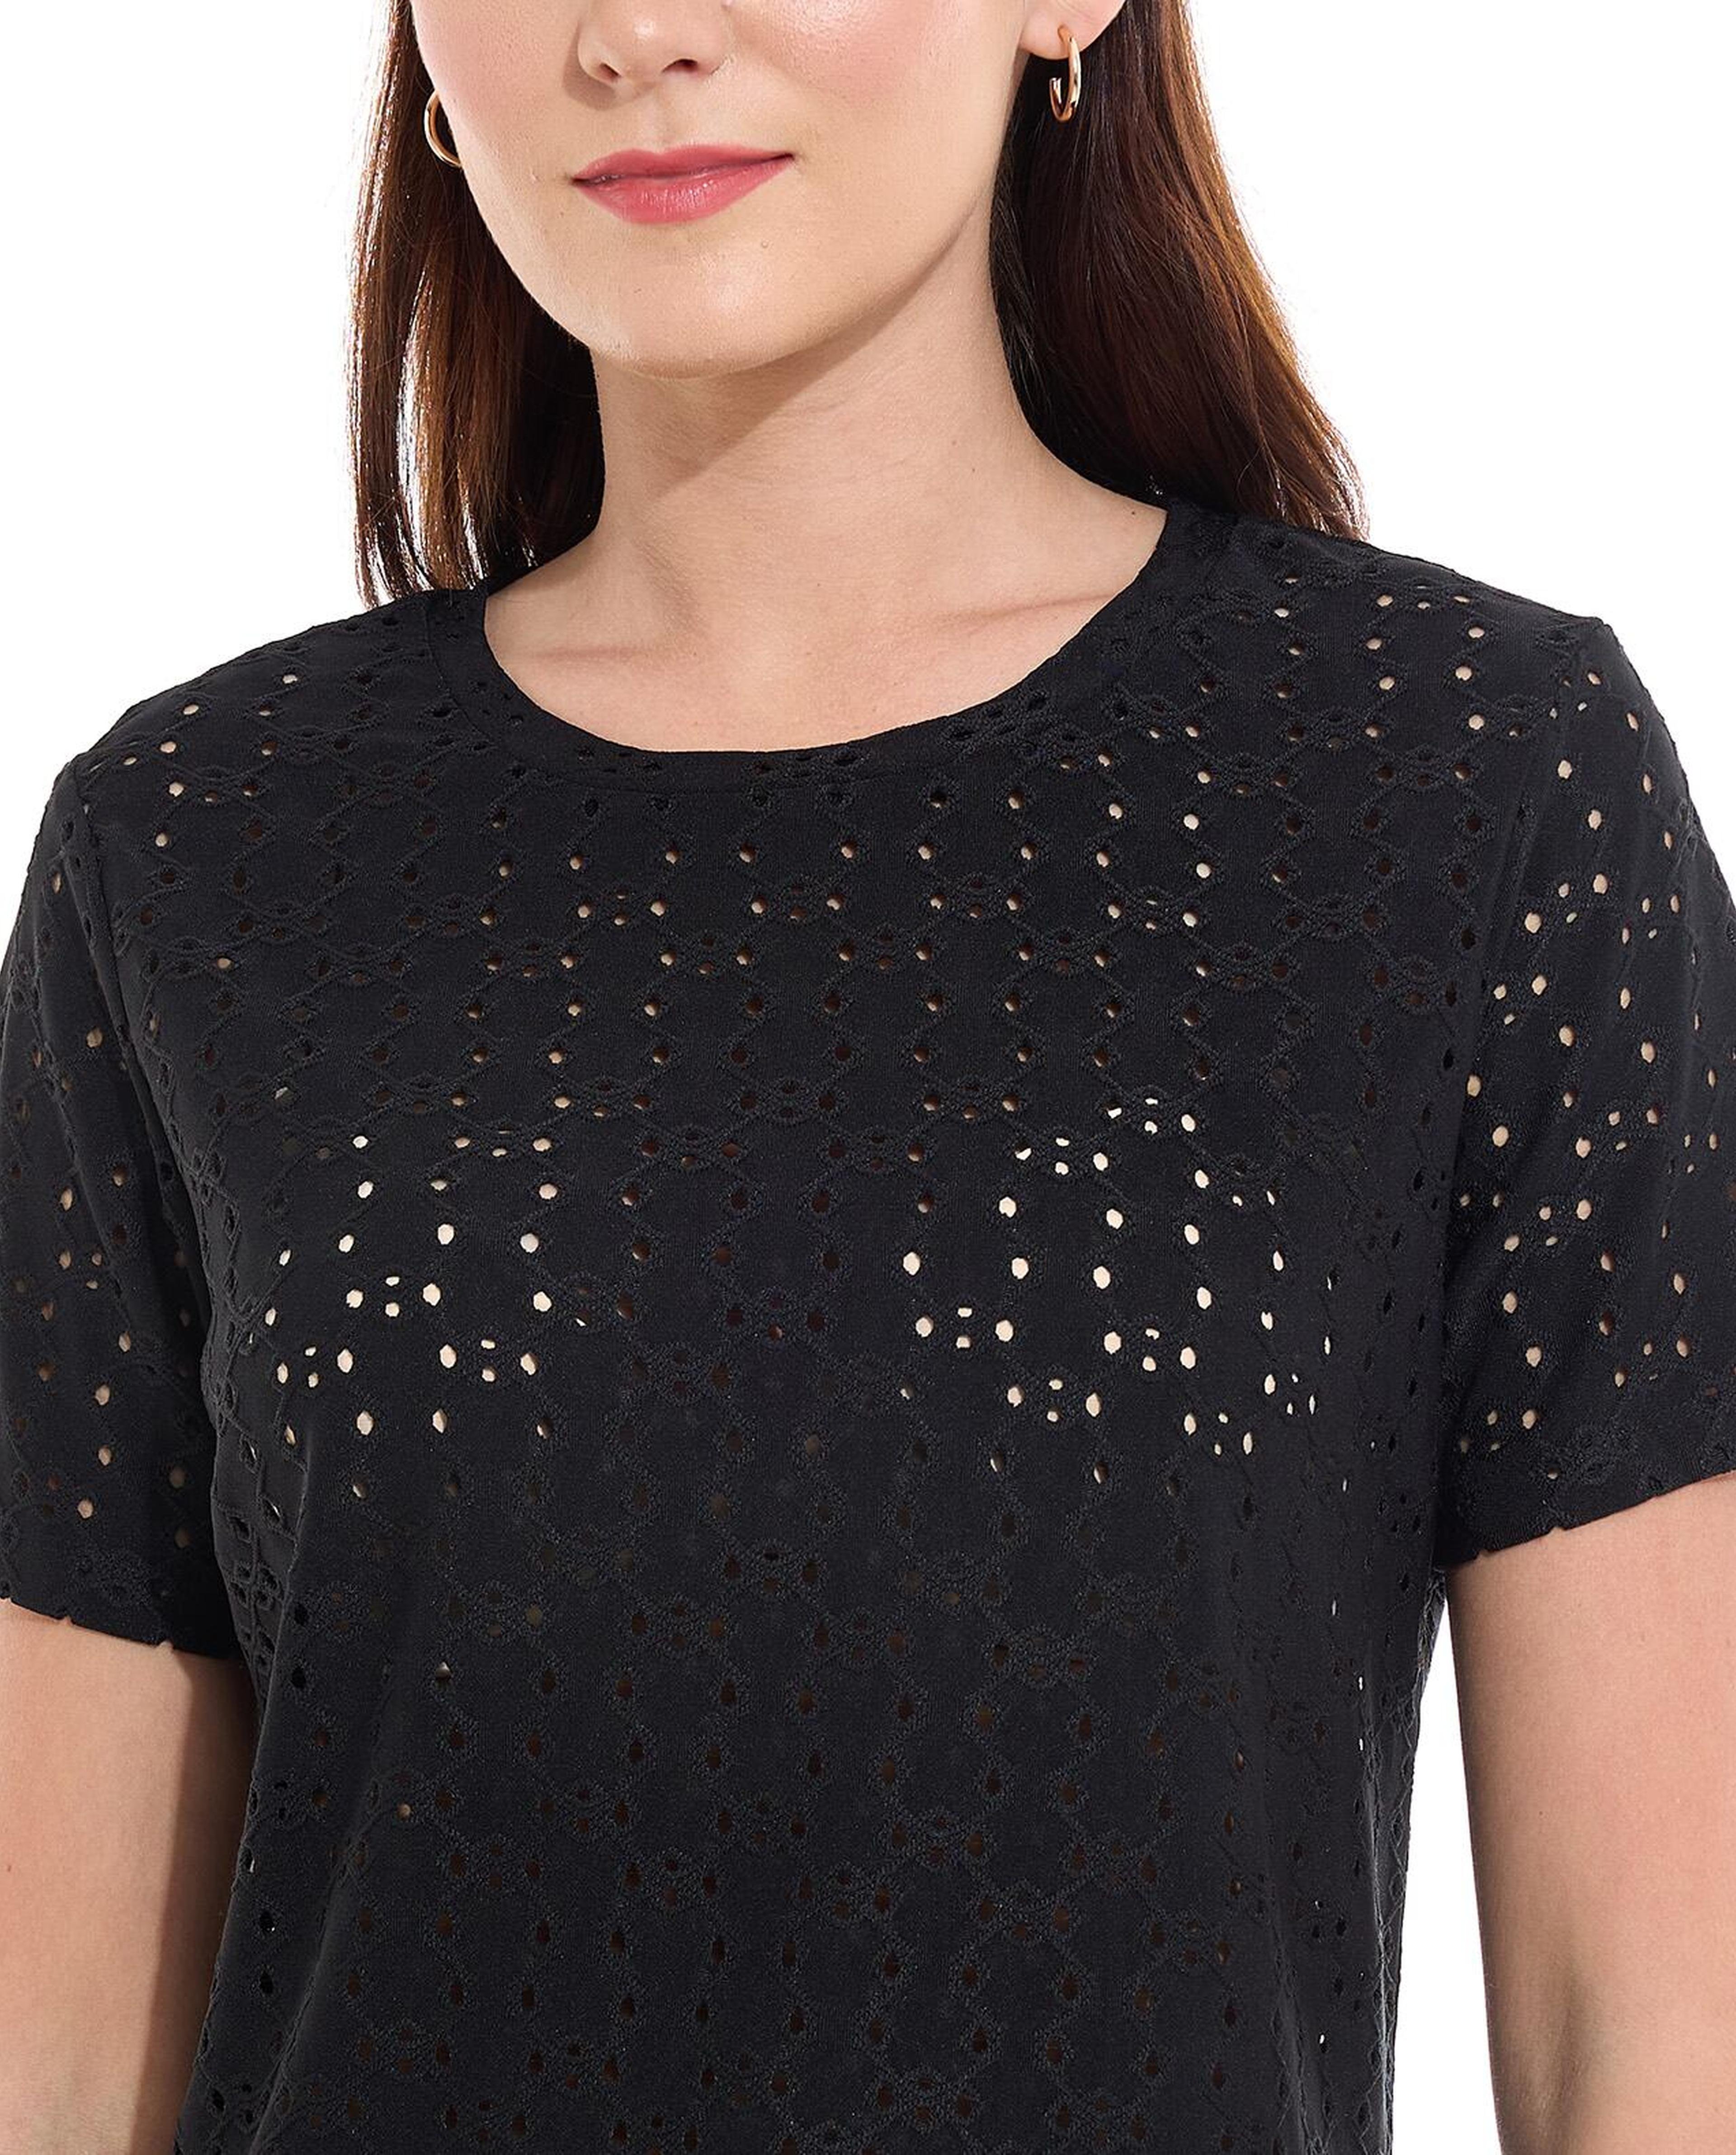 Openwork Top with Crew Neck and Short Sleeves